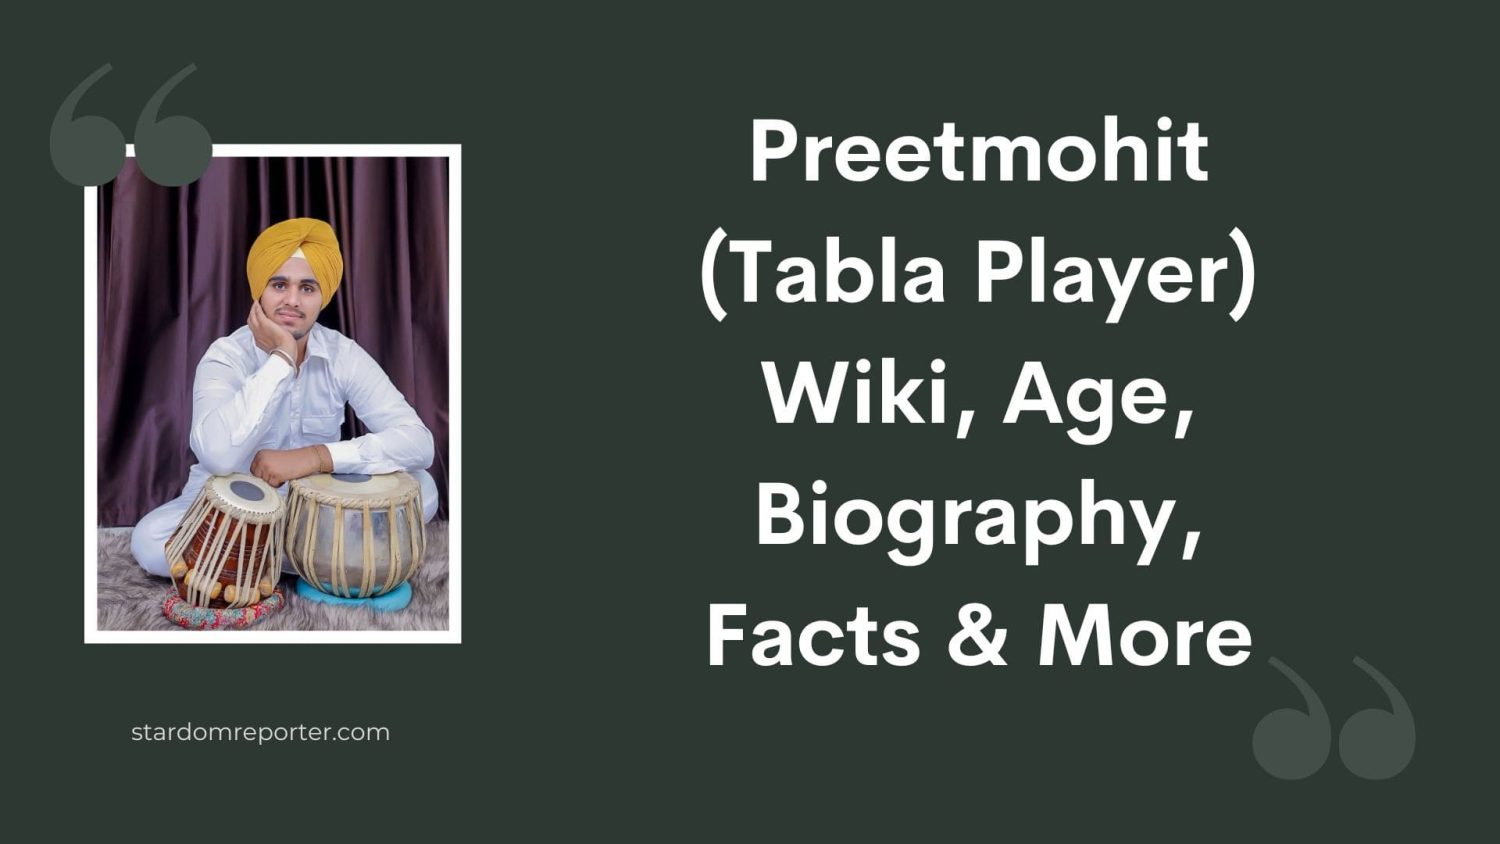 Preetmohit (Tabla Player) Wiki, Age, Biography, Facts & More - 11